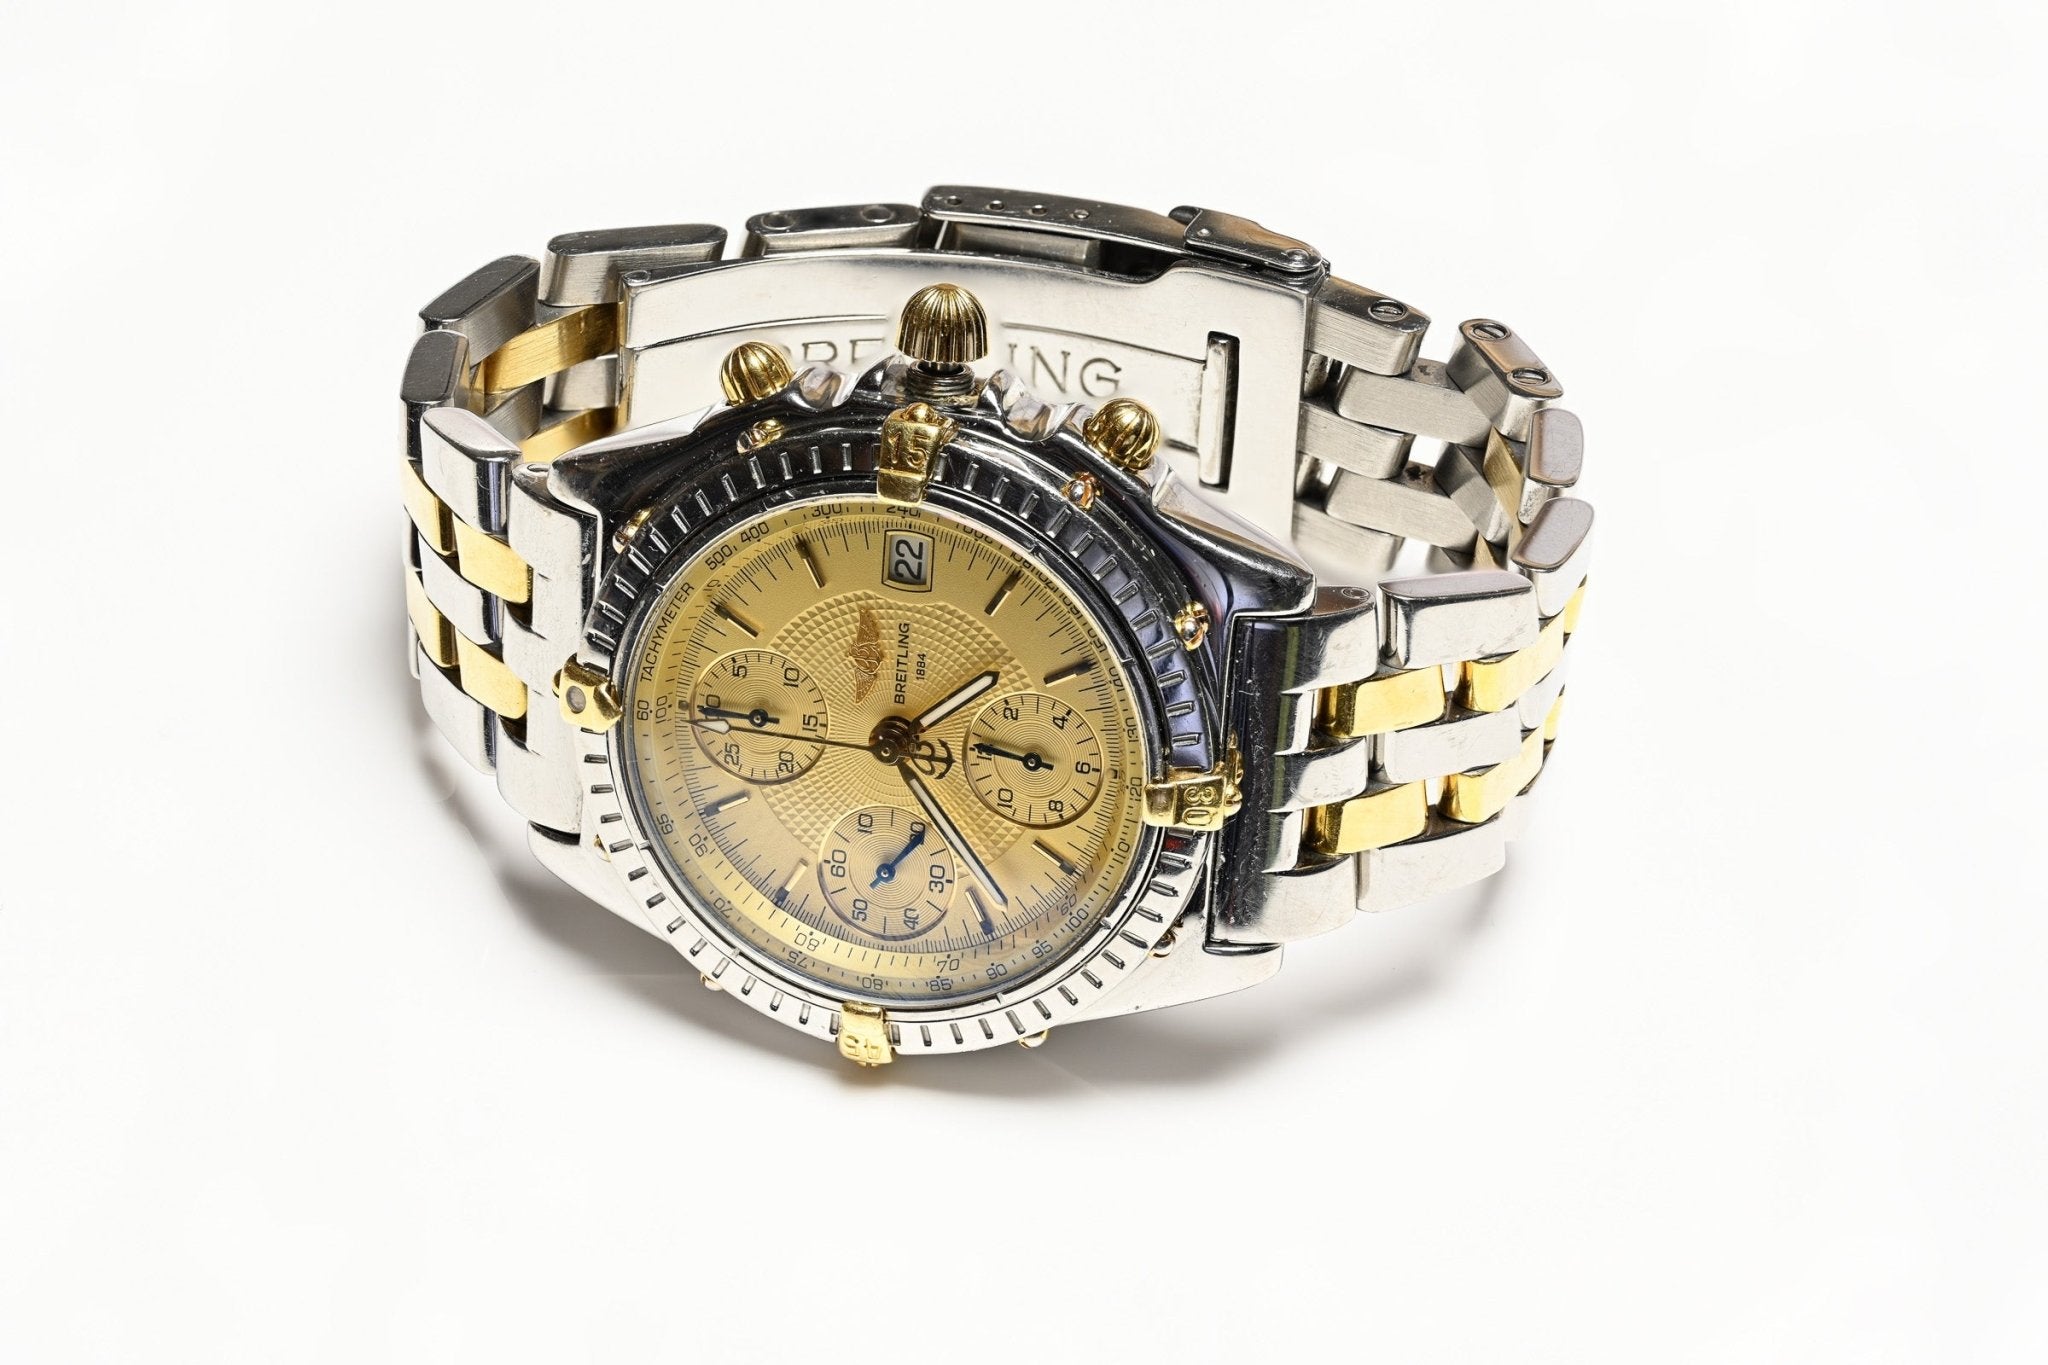 Breitling Chronograph Steel & Gold Automatic Watch Ref. B 13050.1 - DSF Antique Jewelry